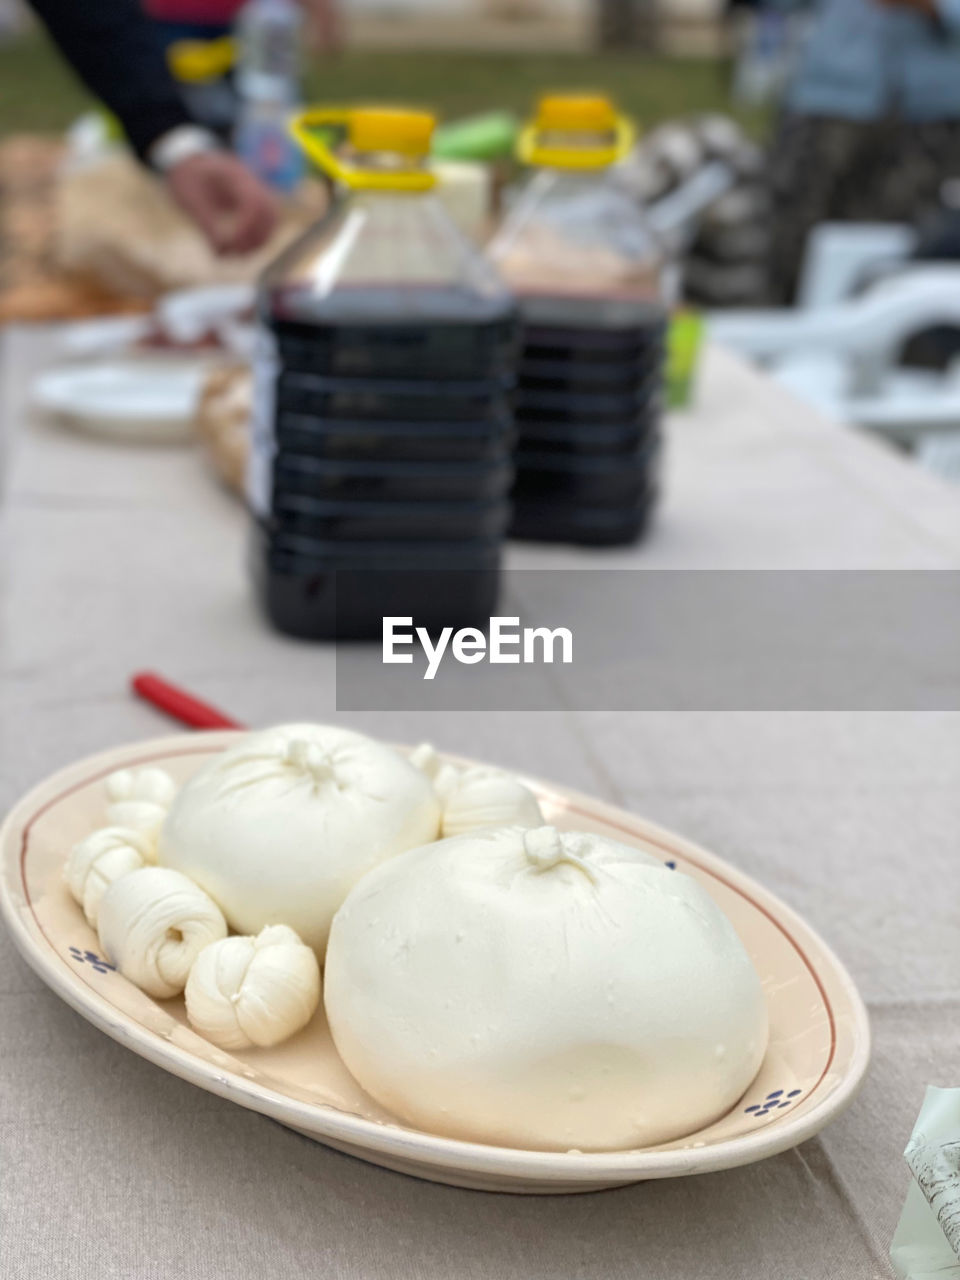 food, food and drink, dish, freshness, focus on foreground, baked, dumpling, meal, asian food, healthy eating, dessert, cuisine, chinese food, breakfast, sweet food, table, close-up, business, buuz, xiaolongbao, wellbeing